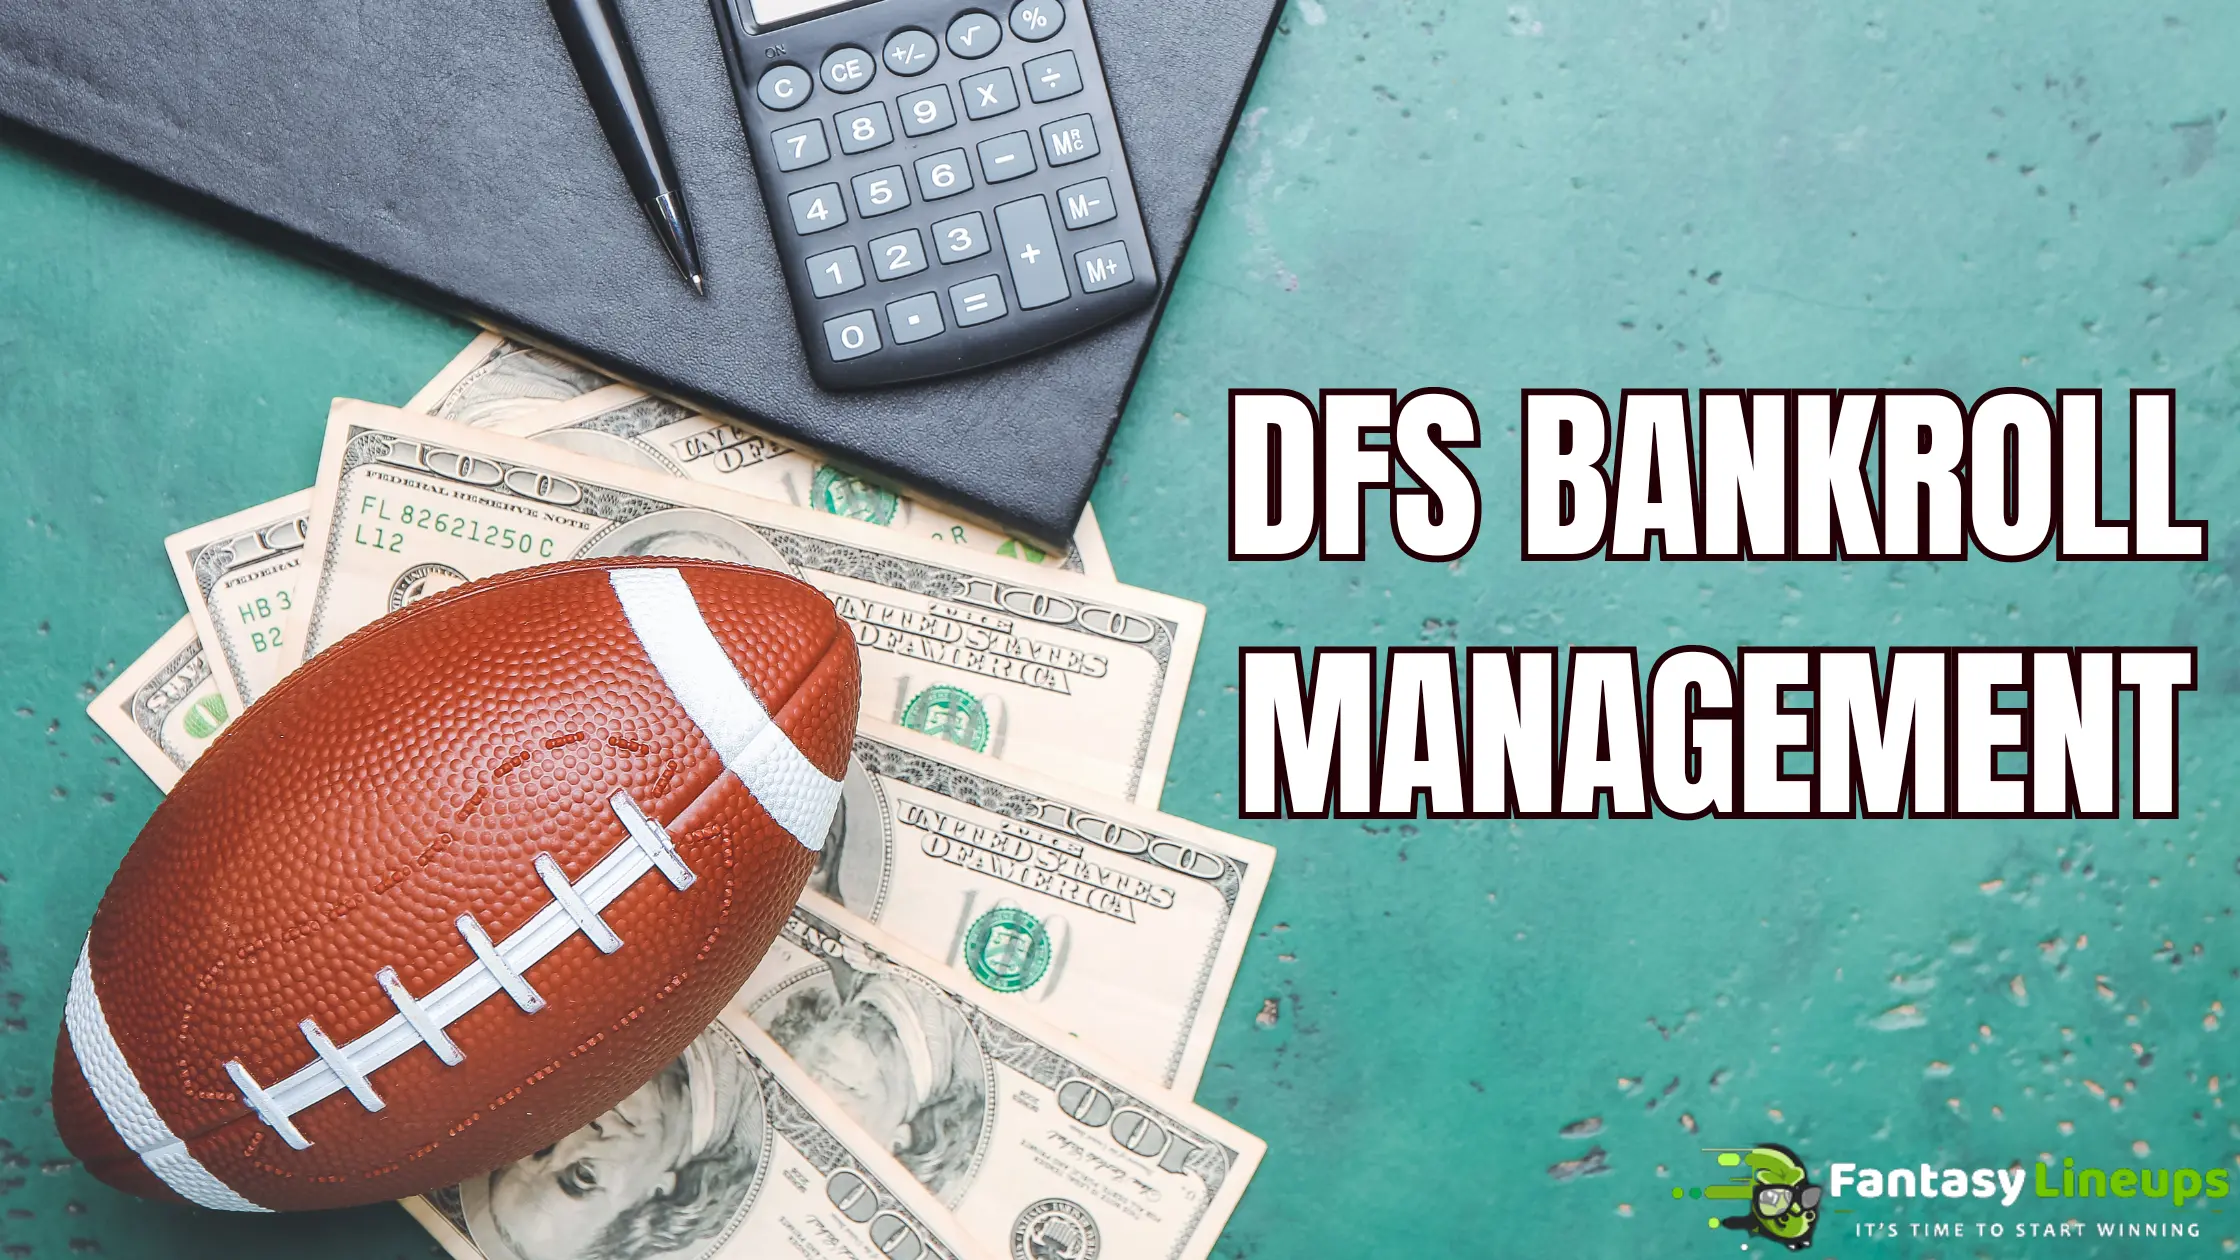 The most essential DFS Bankroll Management Strategies with FantasyLineups’ DFS Bank Roll Tracker